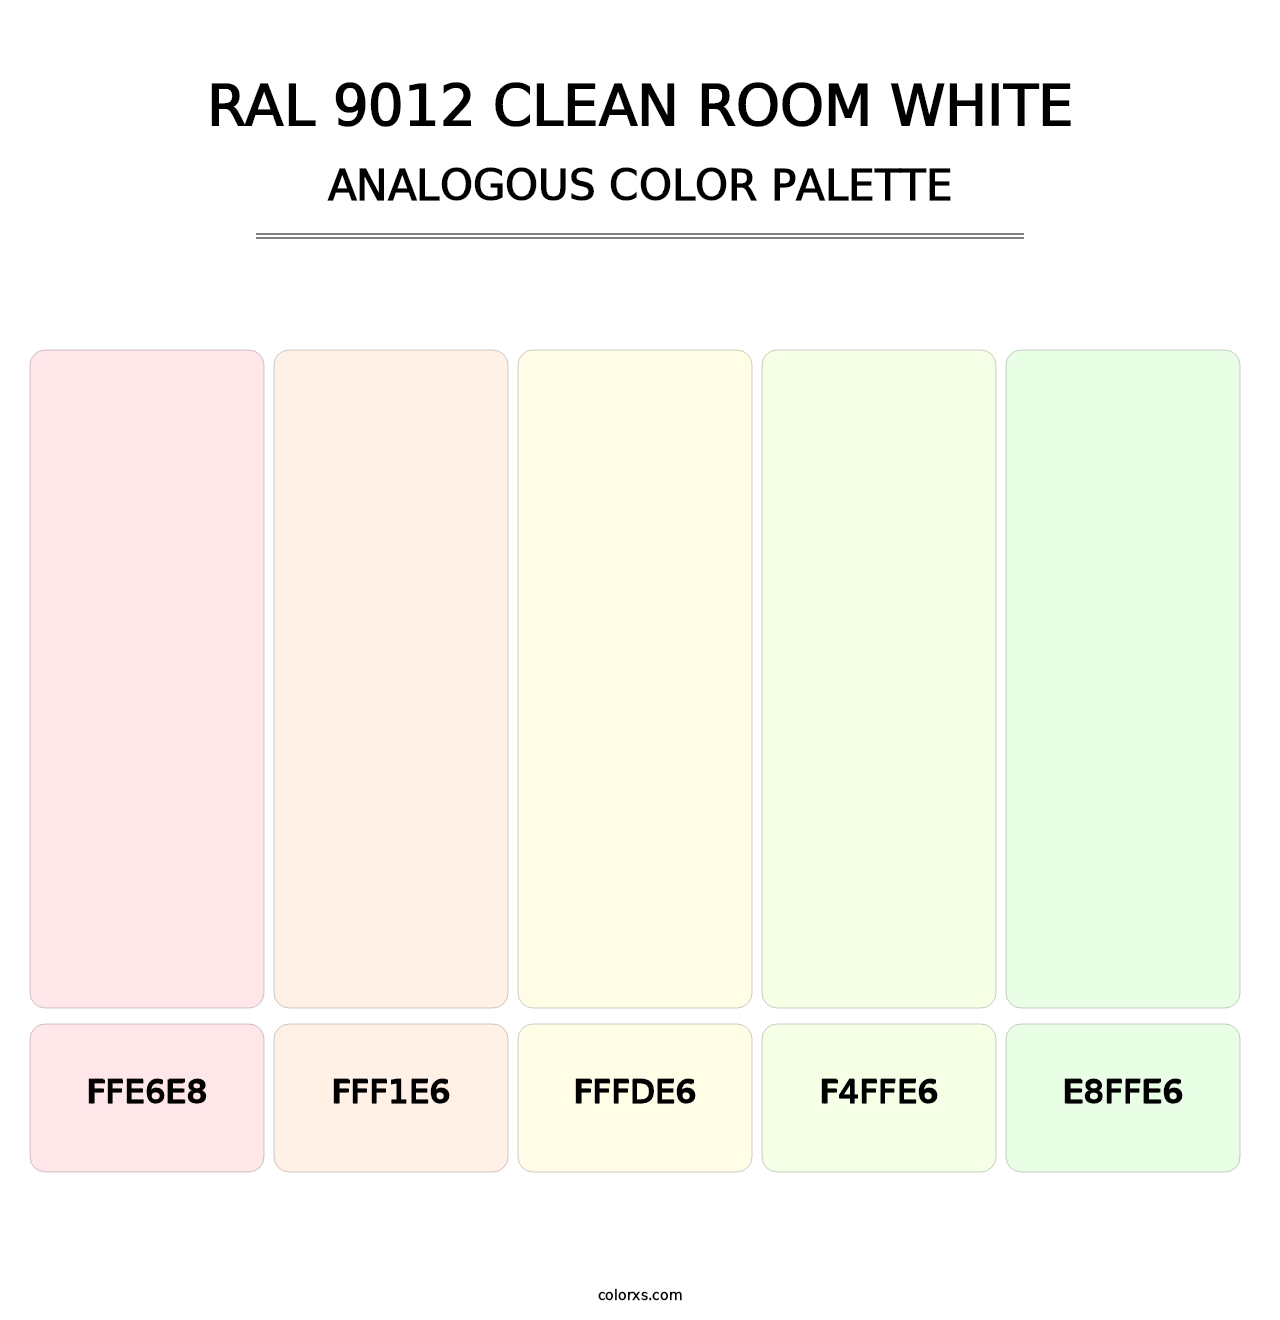 RAL 9012 Clean Room White - Analogous Color Palette